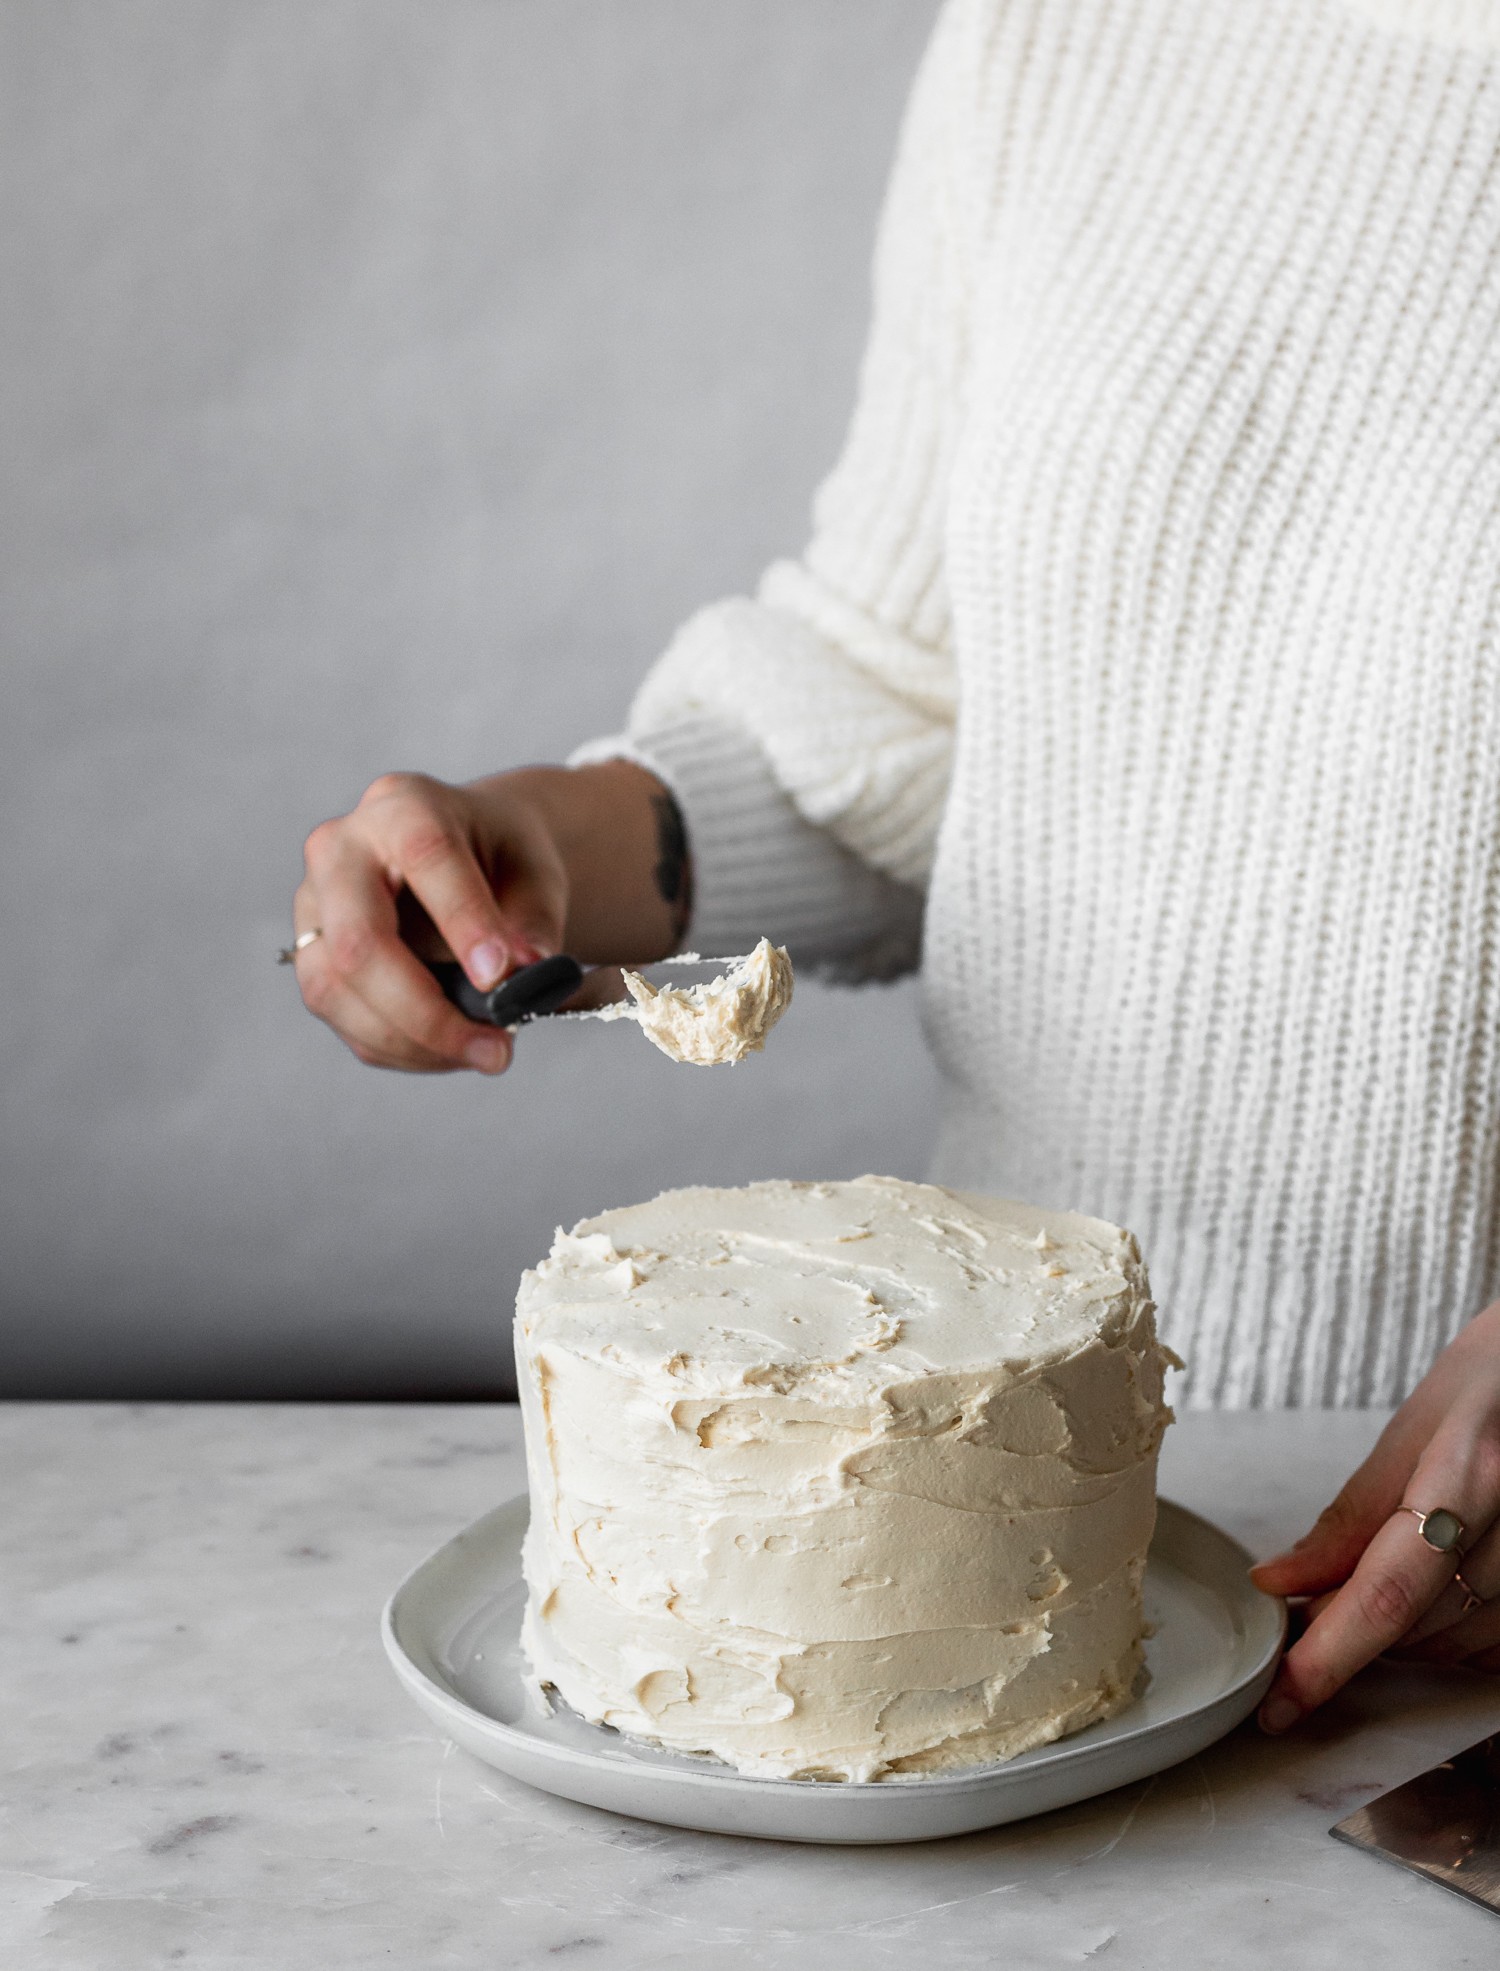 A woman wearing a white sweater frosting a layer cake.